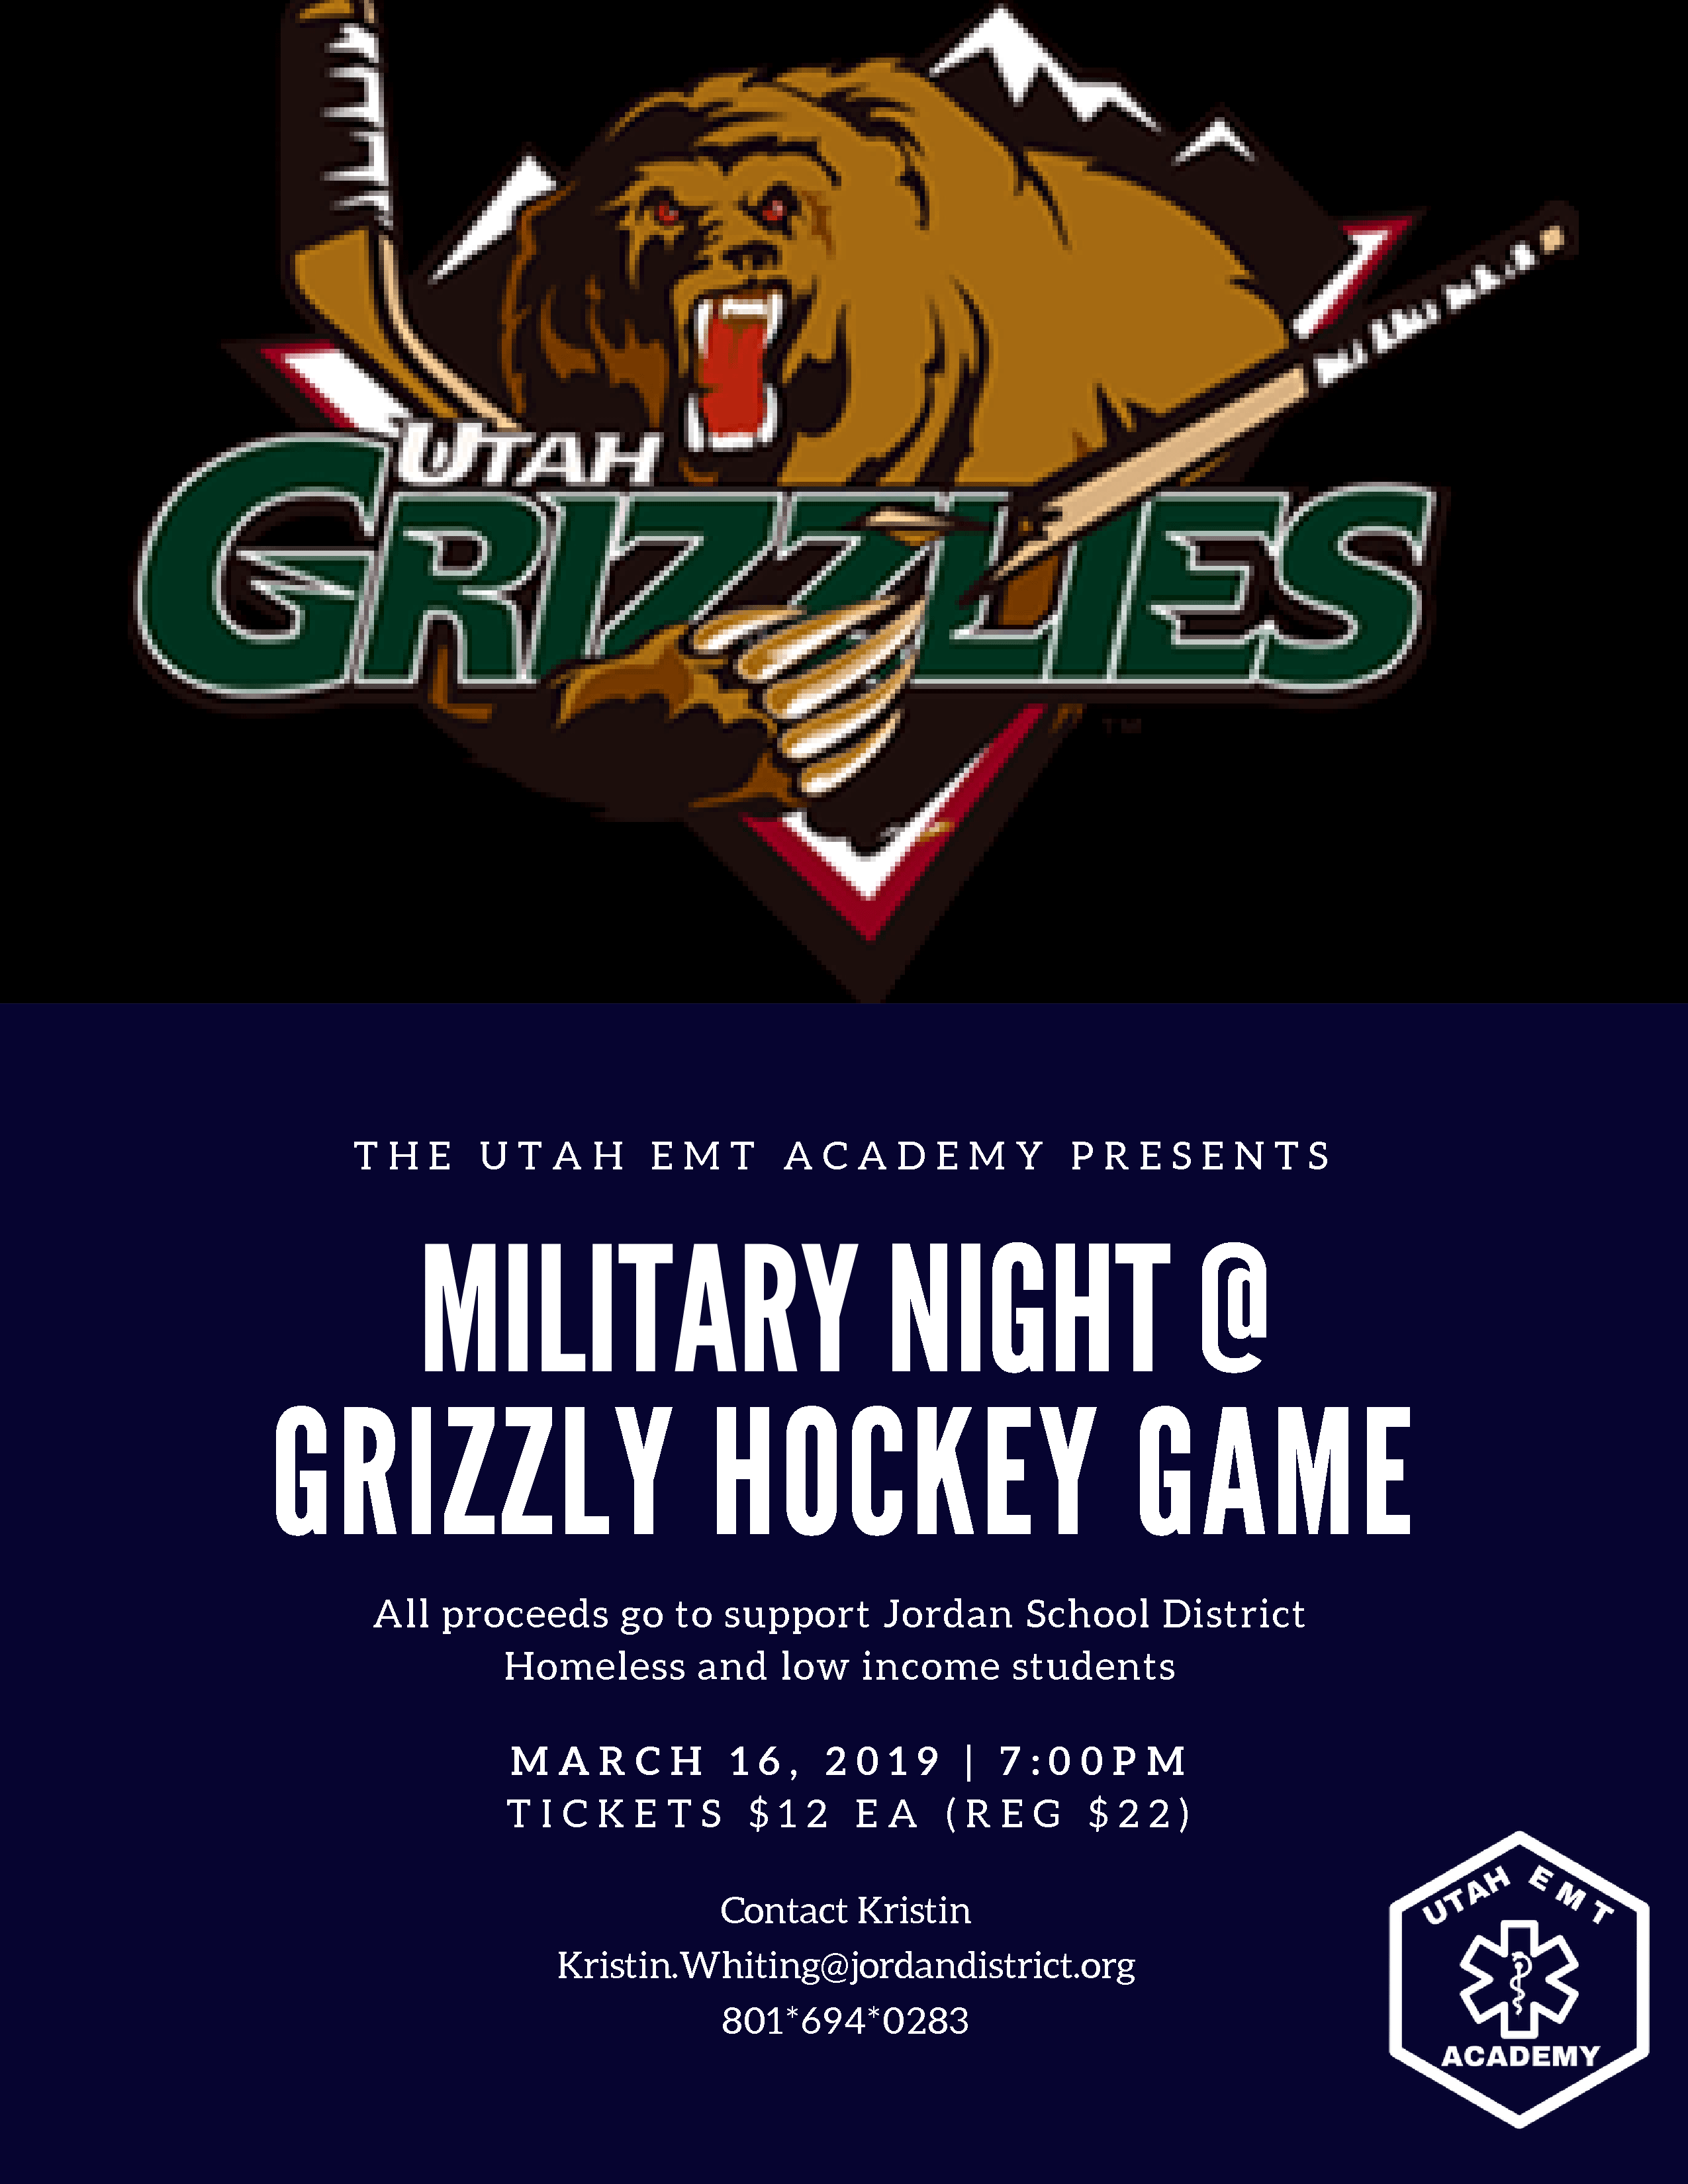 Utah EMT Academy Presents Military Night @ Grizzly Hockey Game